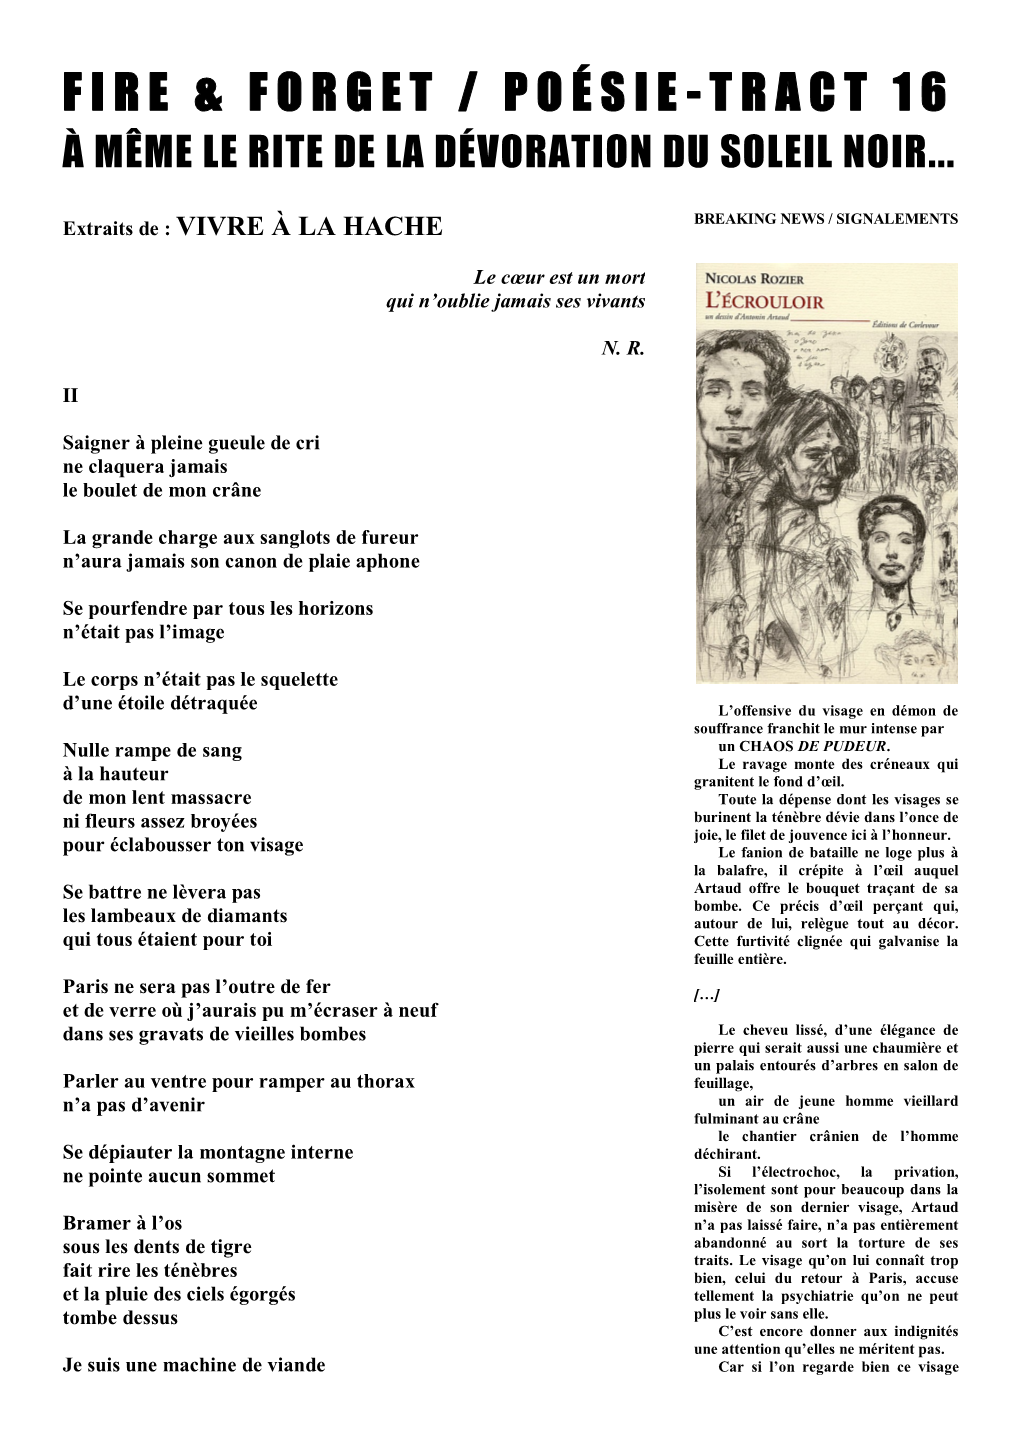 Fire & Forget / Poésie-Tract 16